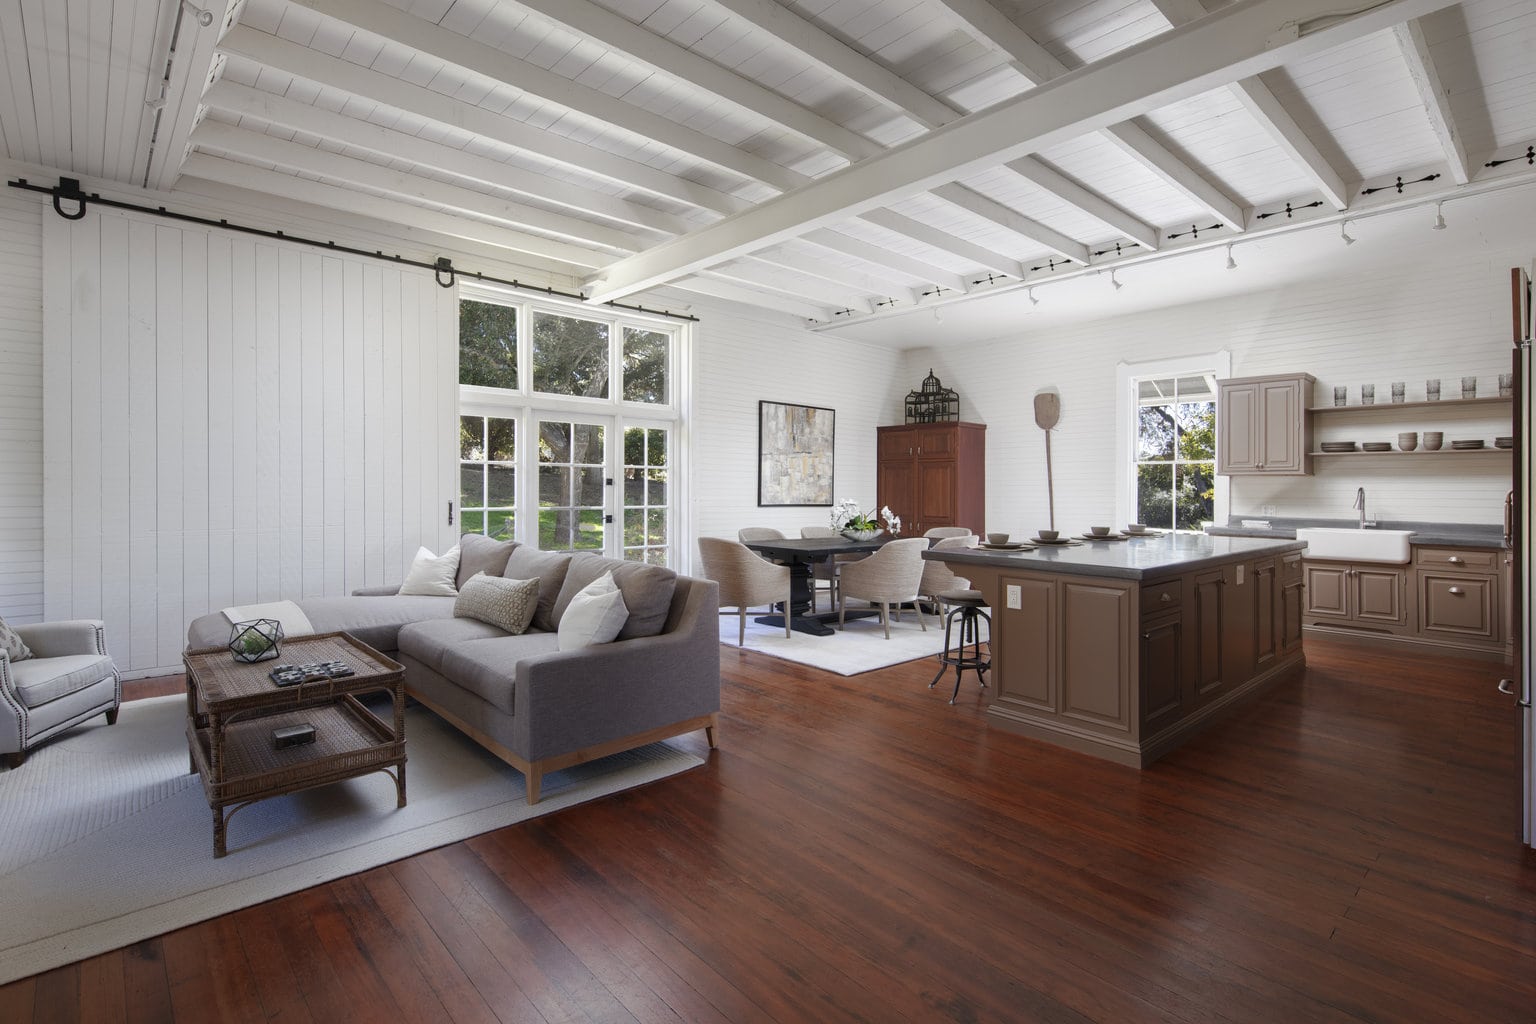 kitchen-and-dining-room-of-a-ranch-style-equestrian-home-in-carpinteria